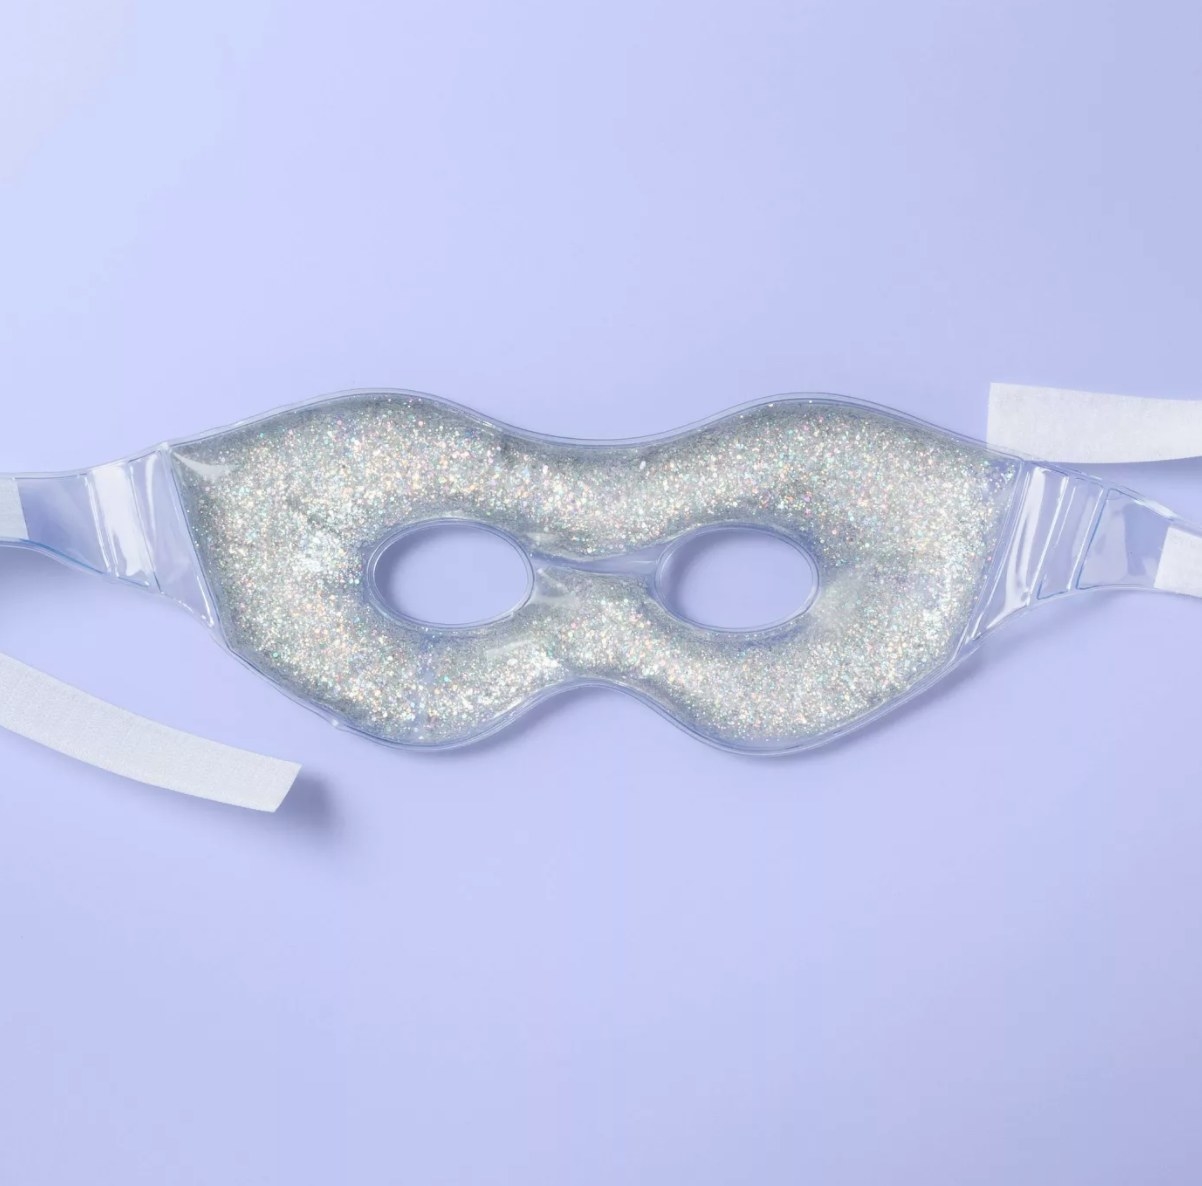 The glitter gel eye mask with hook and loop closure